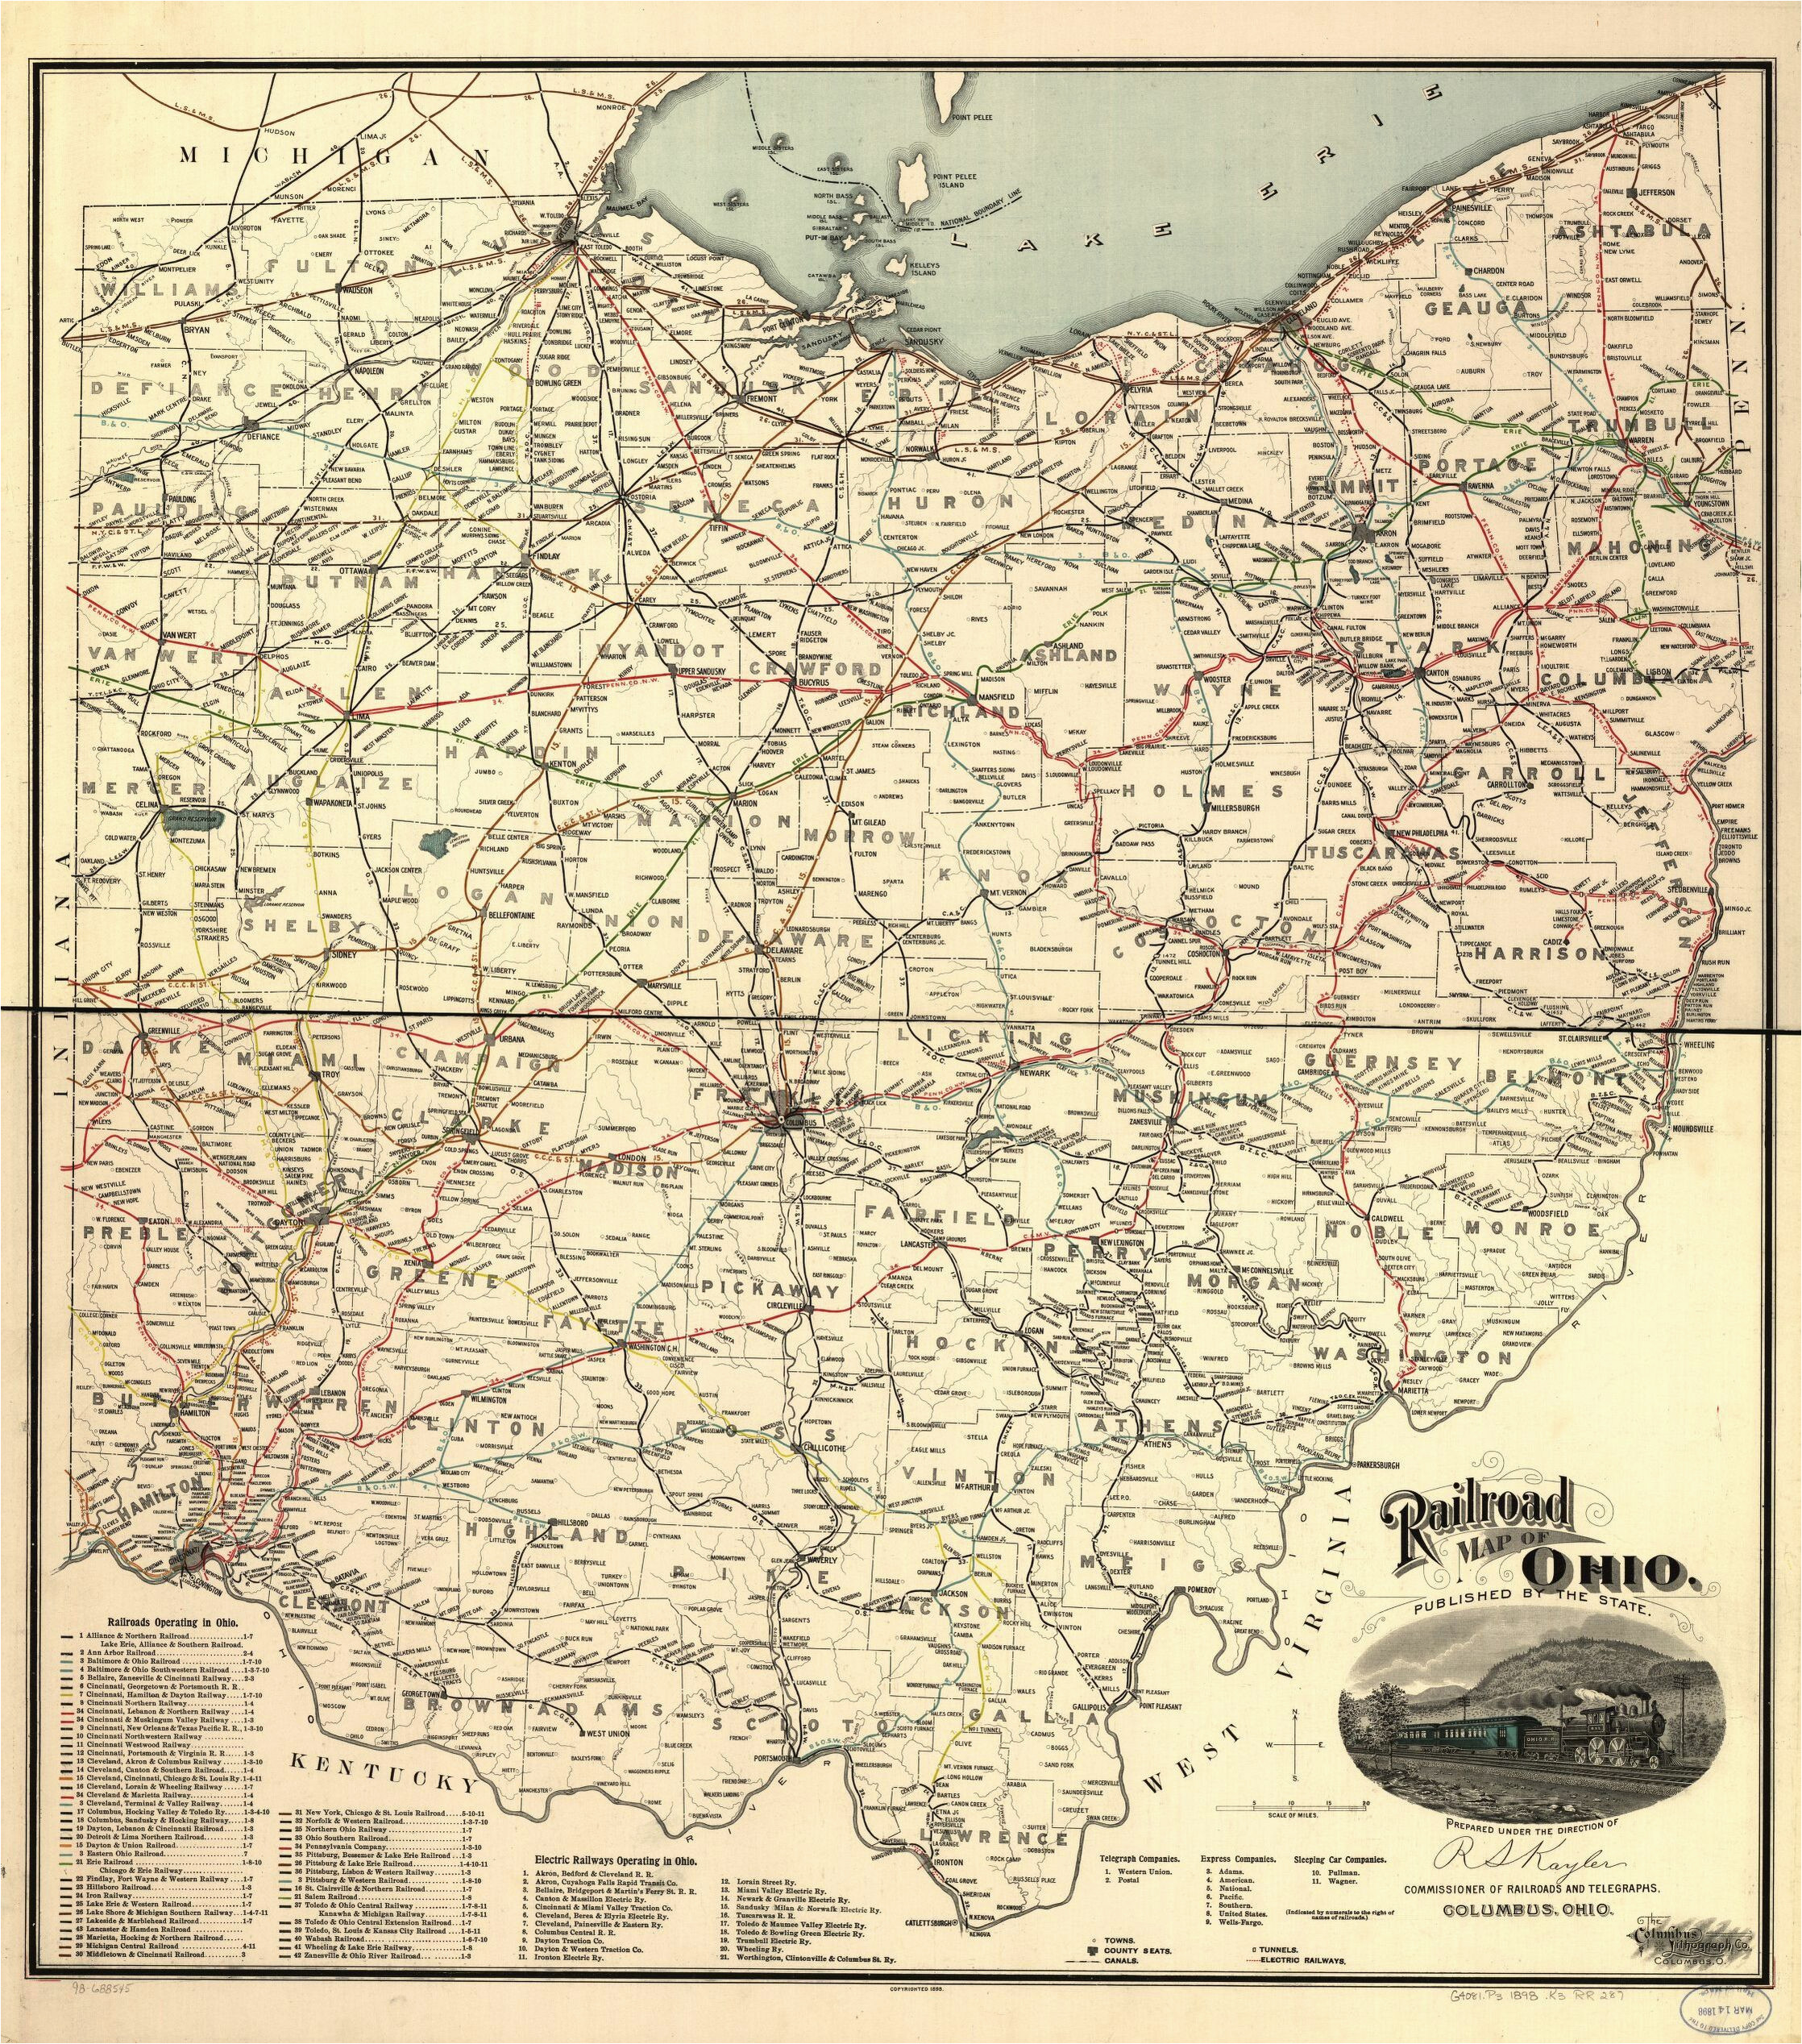 railroad maps 1828 to 1900 library of congress